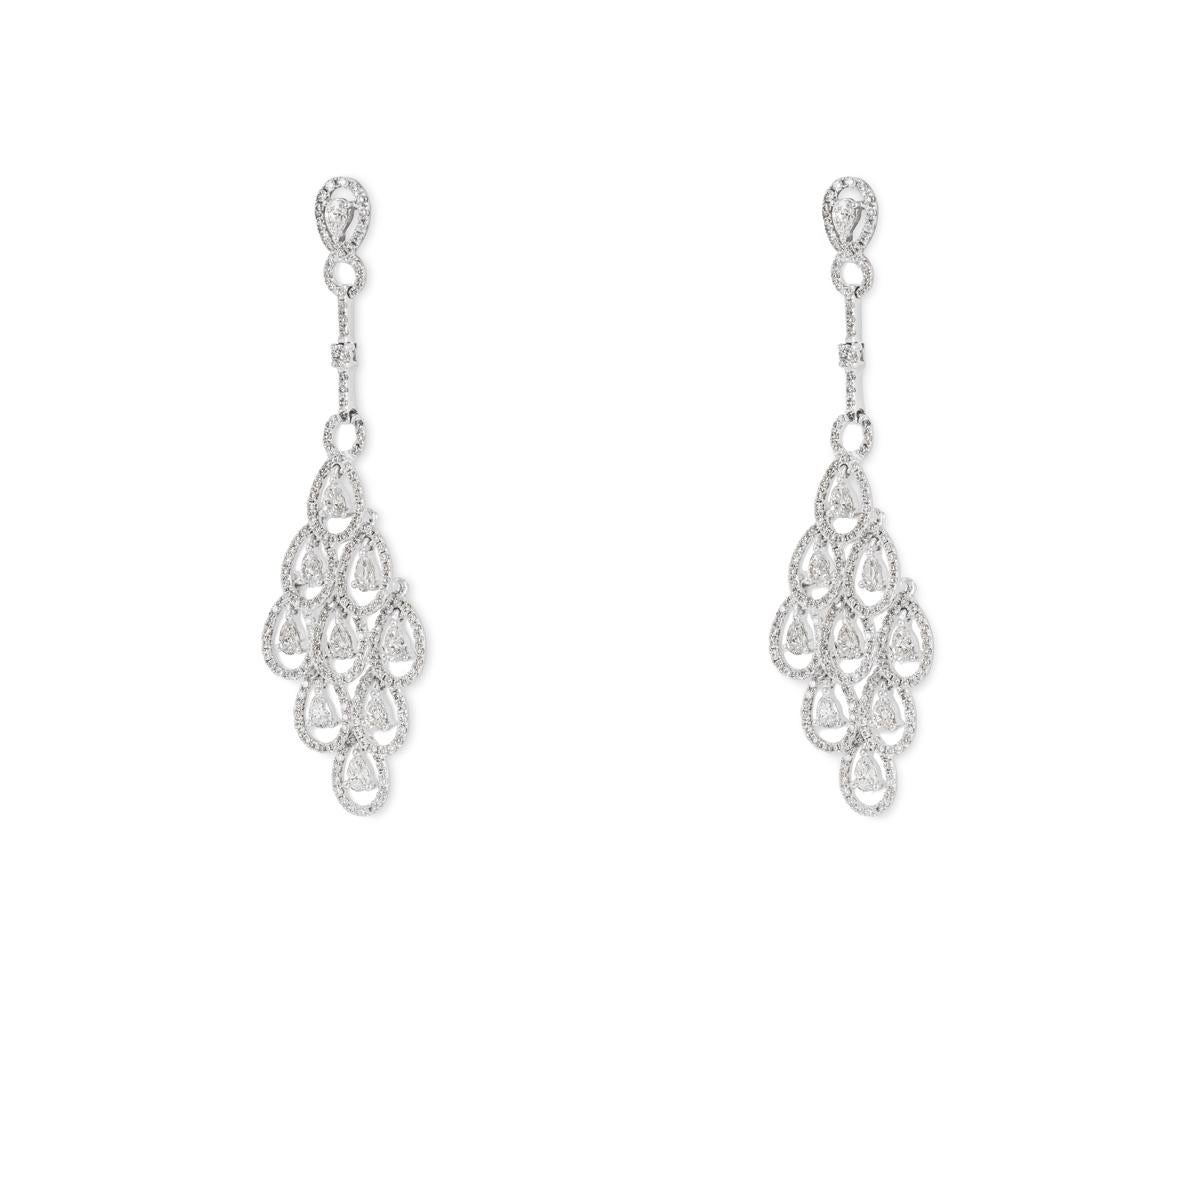 A pair of 18k white gold diamond chandelier motif drop earrings. The earrings features an openwork design with round brilliant cut diamonds in a pave setting around the outer edge with pear cut diamonds and a single round brilliant cut diamond. The